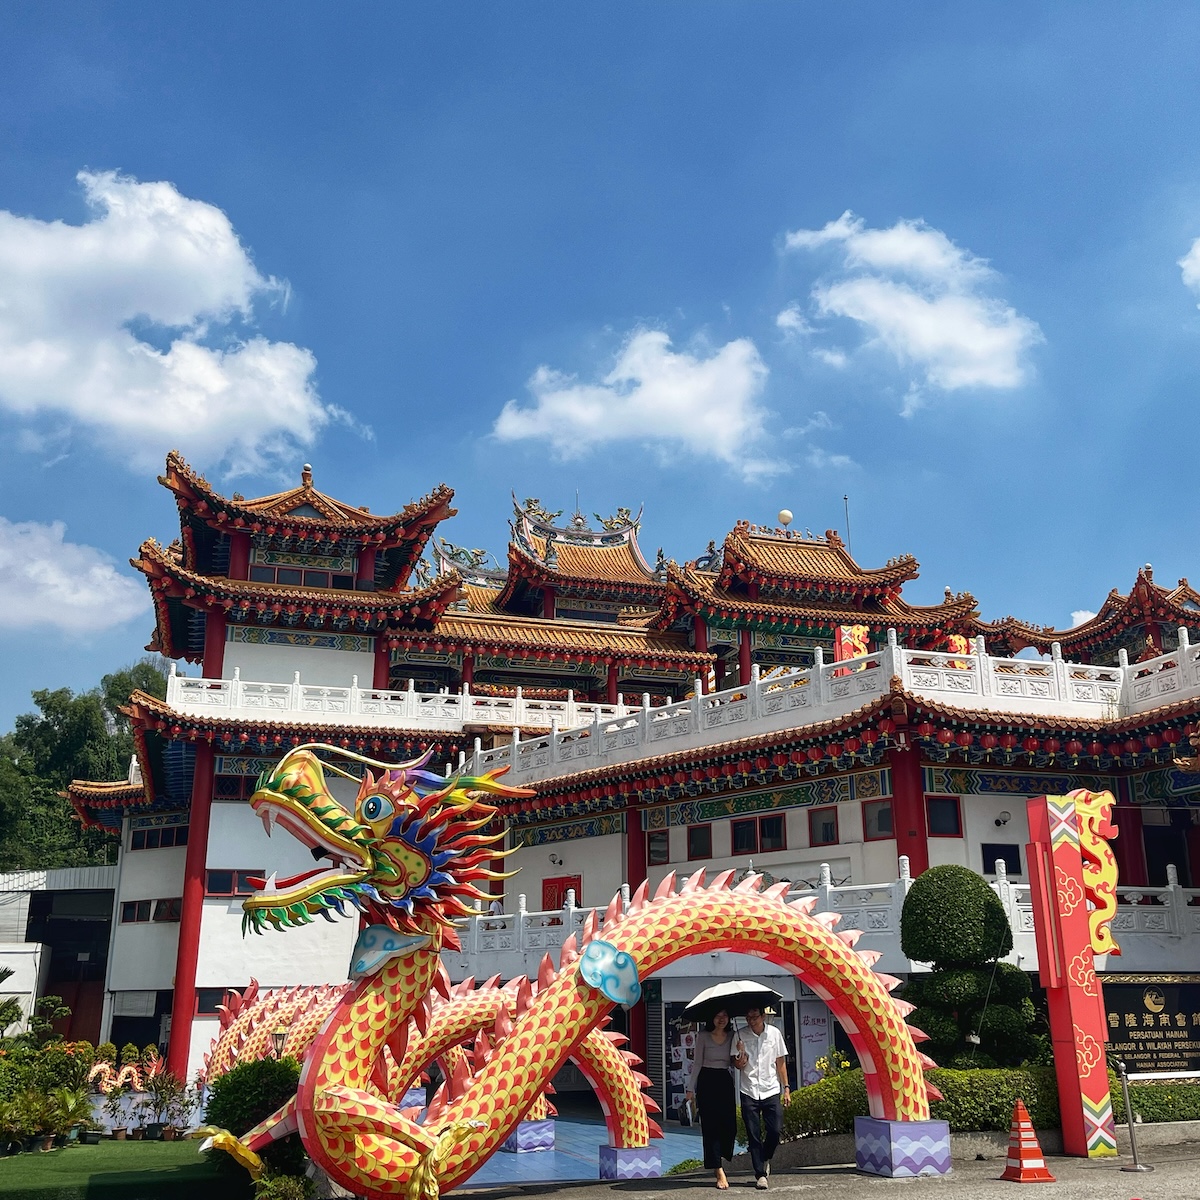 Colorful dragon sculpture and the ornate architecture of Thean Hou Temple in Kuala Lumpur, Malaysia, under a clear blue sky with a few clouds. Visitors are walking near the entrance, highlighting the temple's vibrant design and traditional Chinese elements.